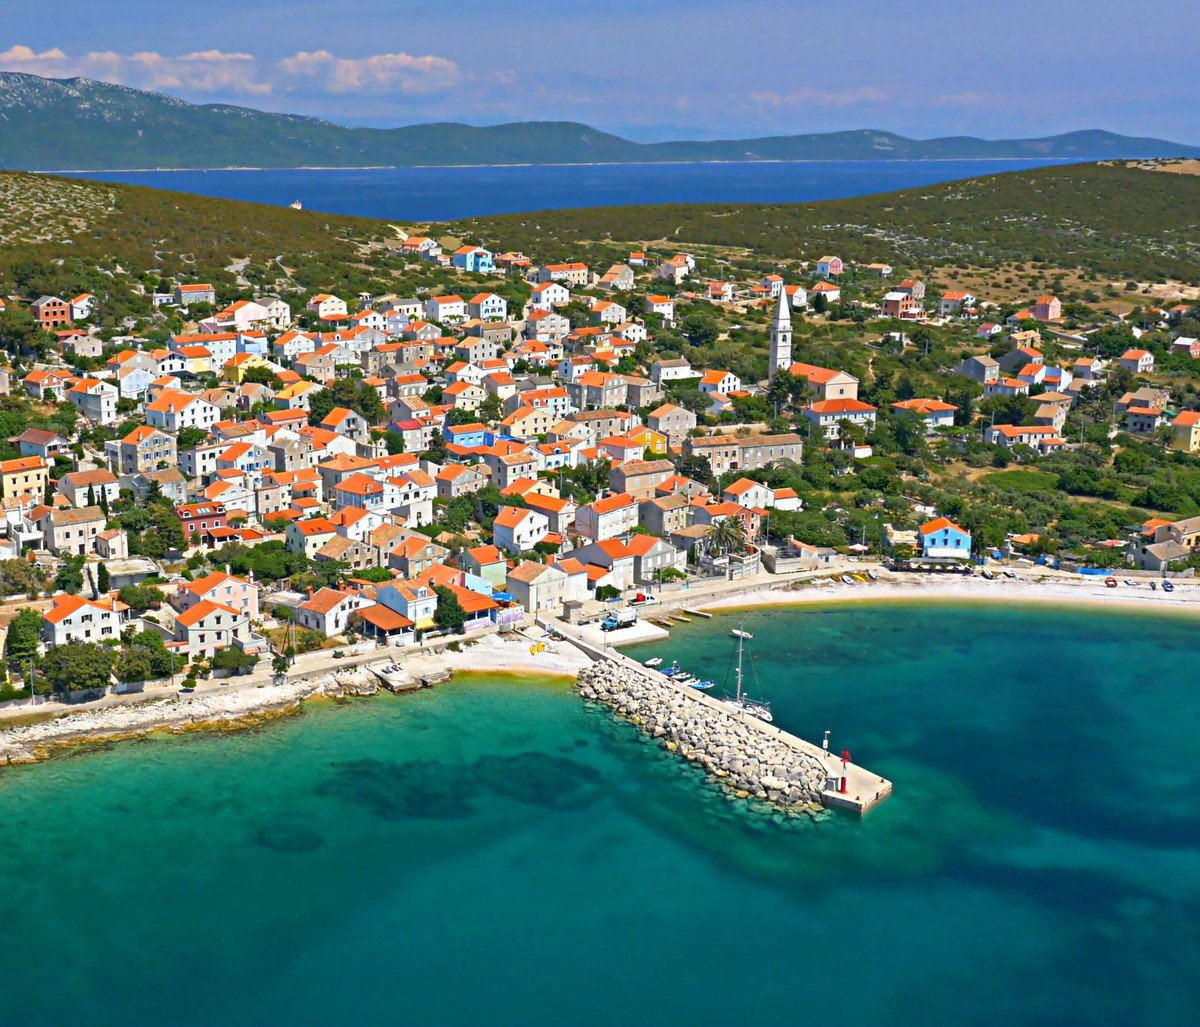 Unije  - a charming colourful village in the middle of Kvarner gulf